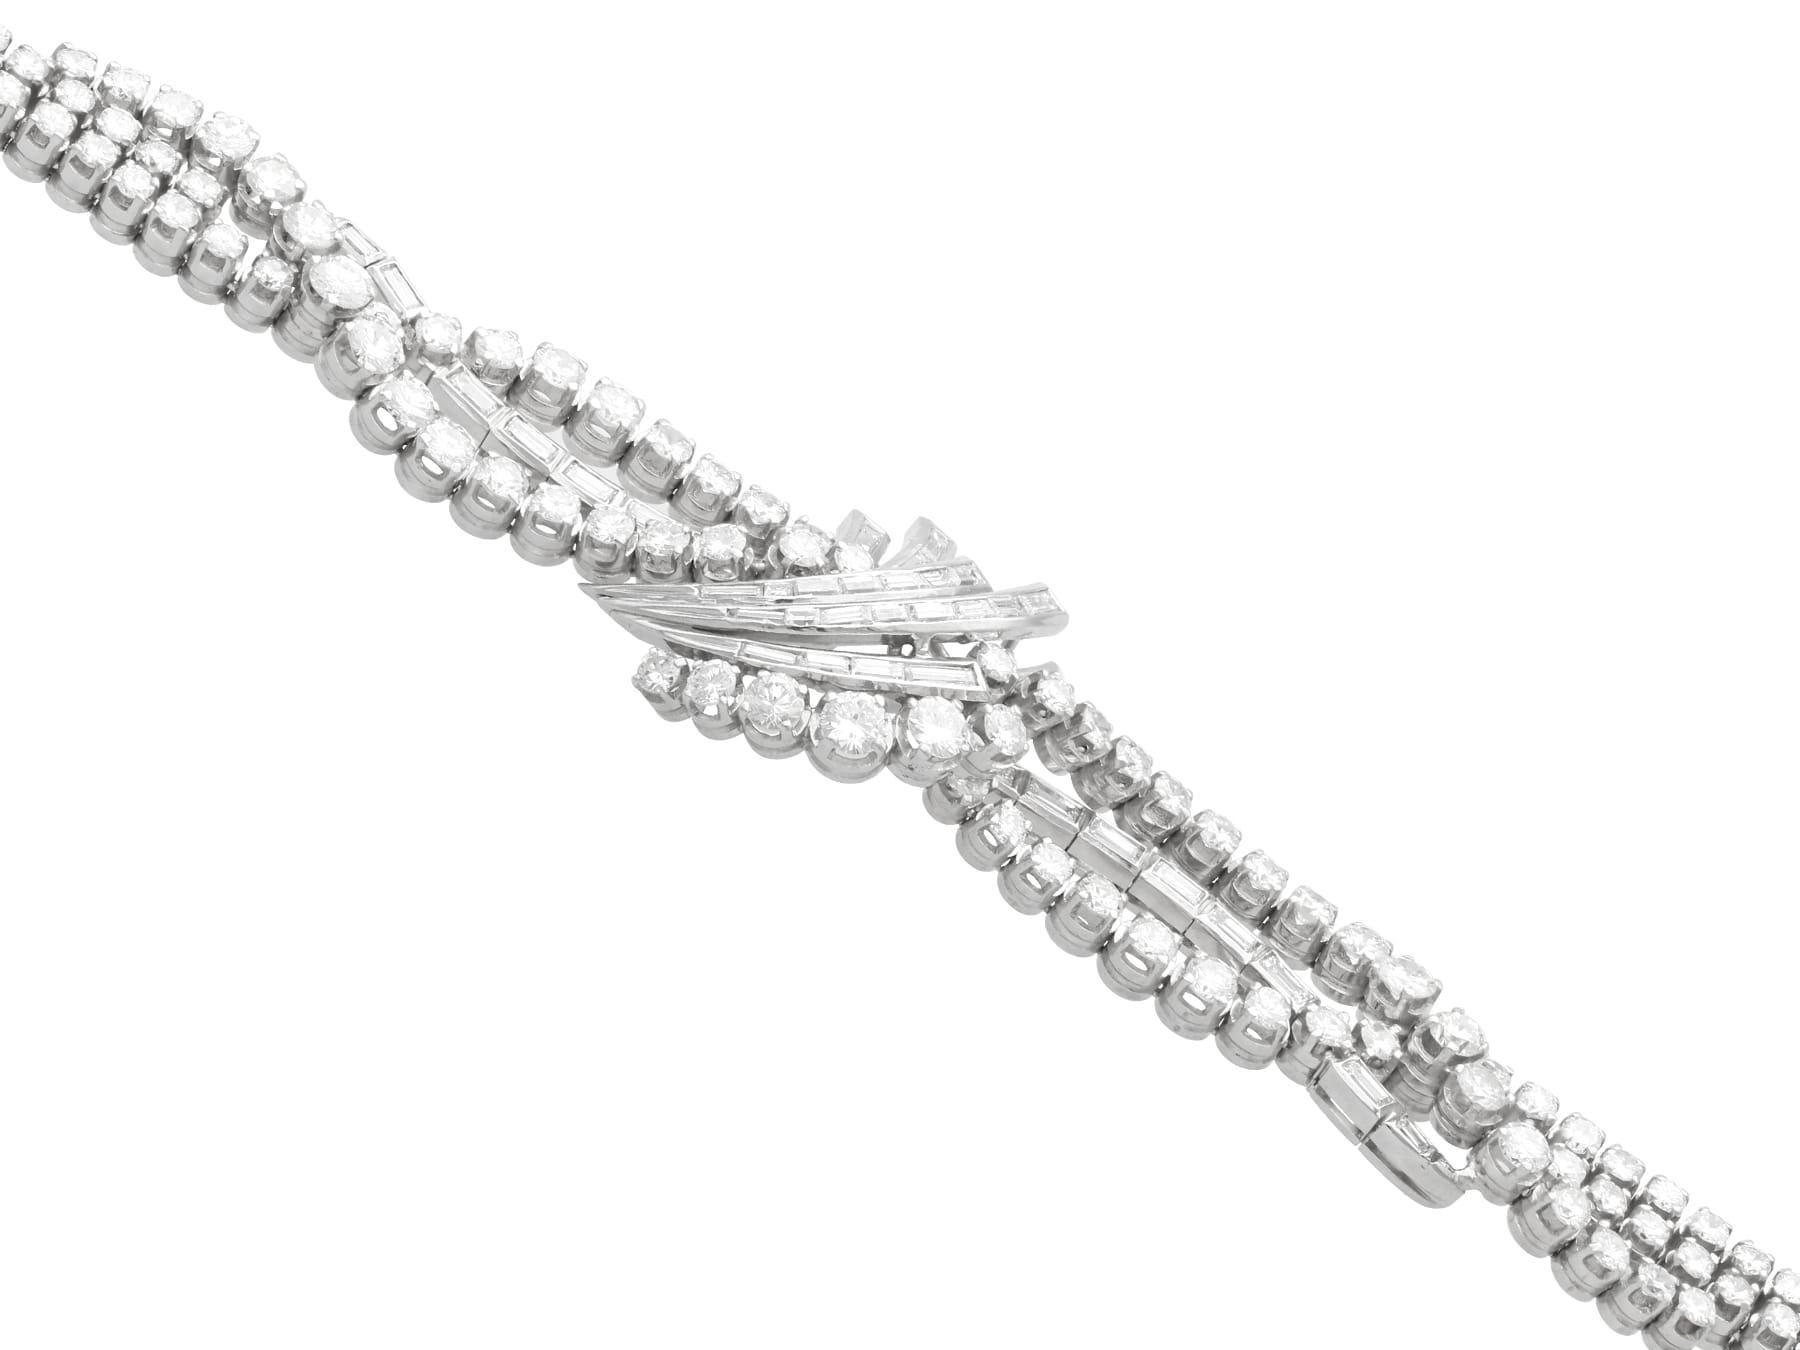 Antique 16 Carat Diamond and Platinum Bracelet  In Excellent Condition For Sale In Jesmond, Newcastle Upon Tyne